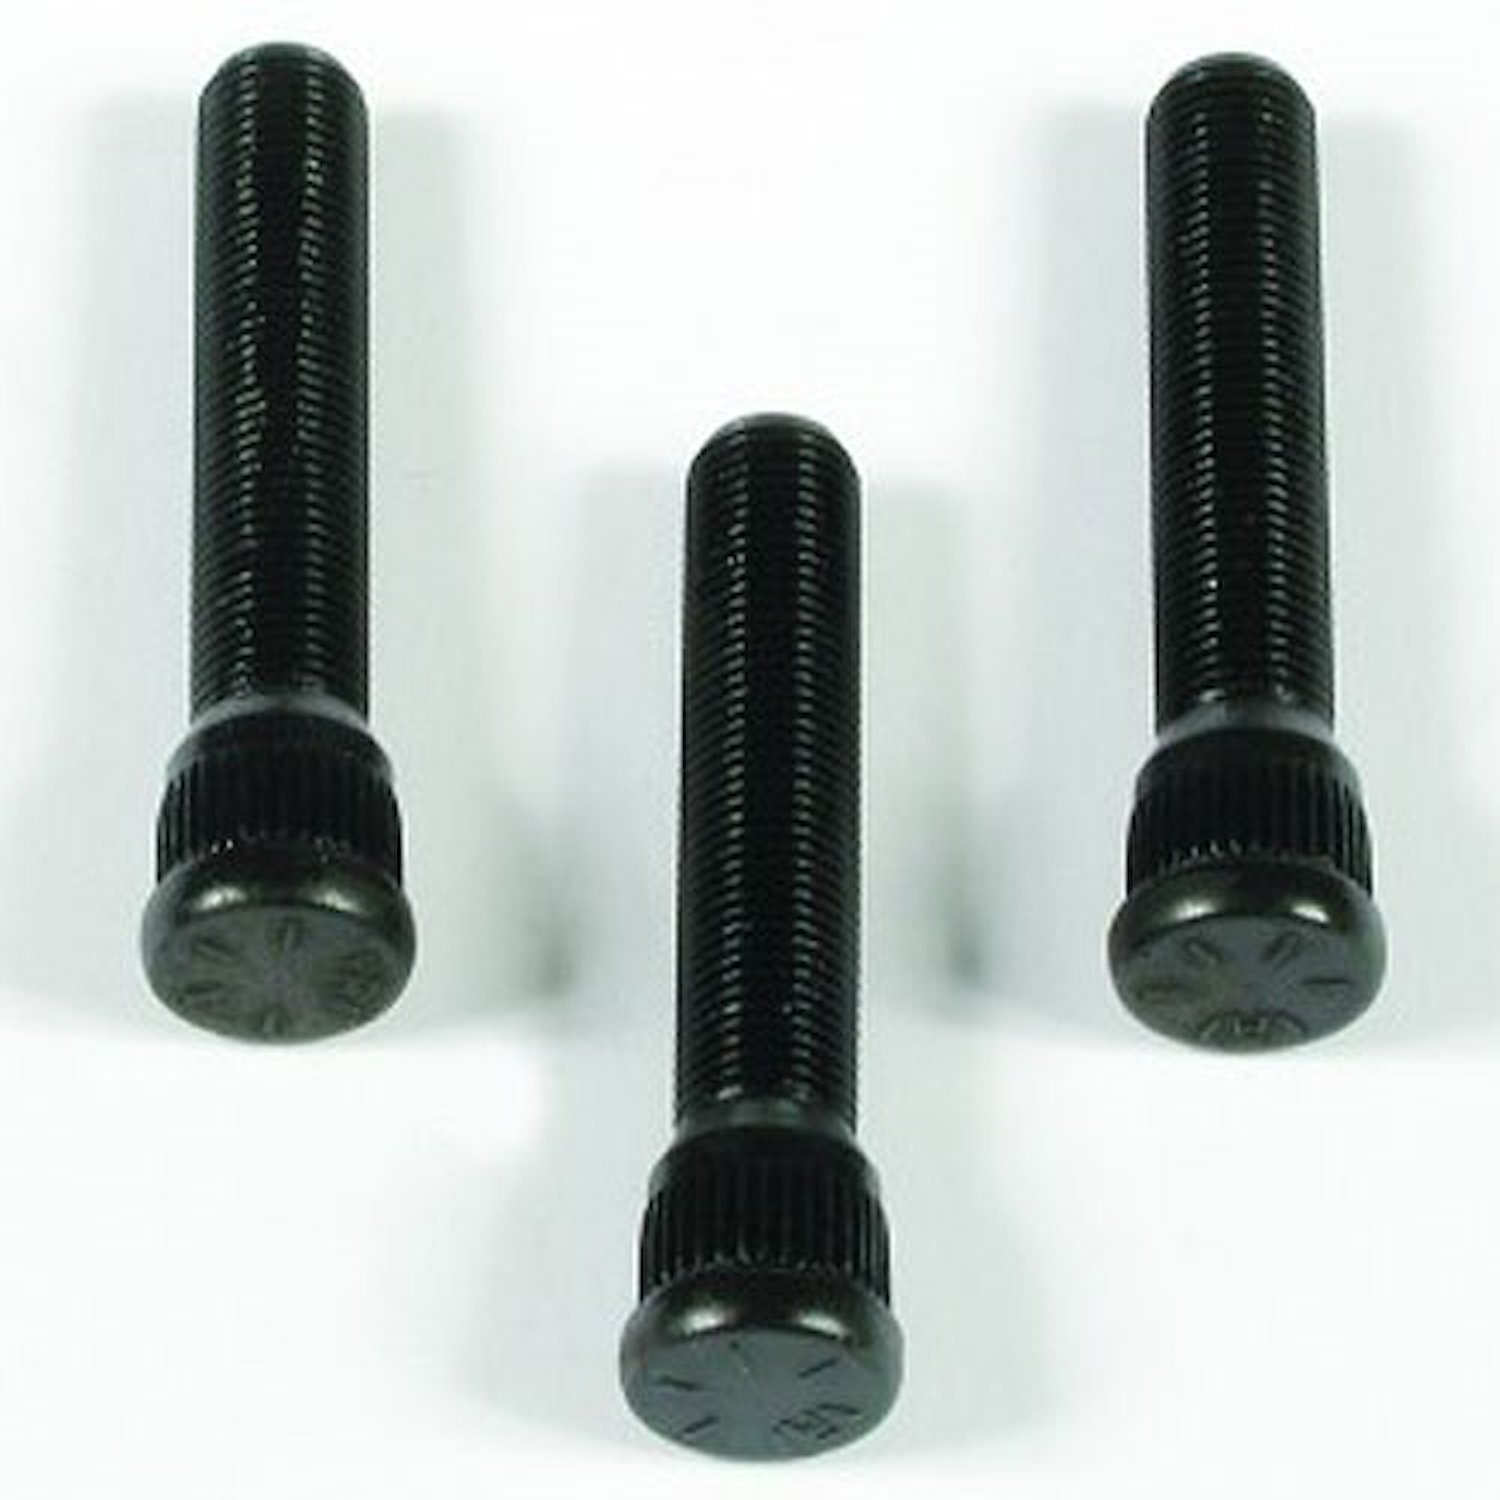 Competition Wheel Studs Chrysler, Ford, and Most Applications with 1/2" Studs